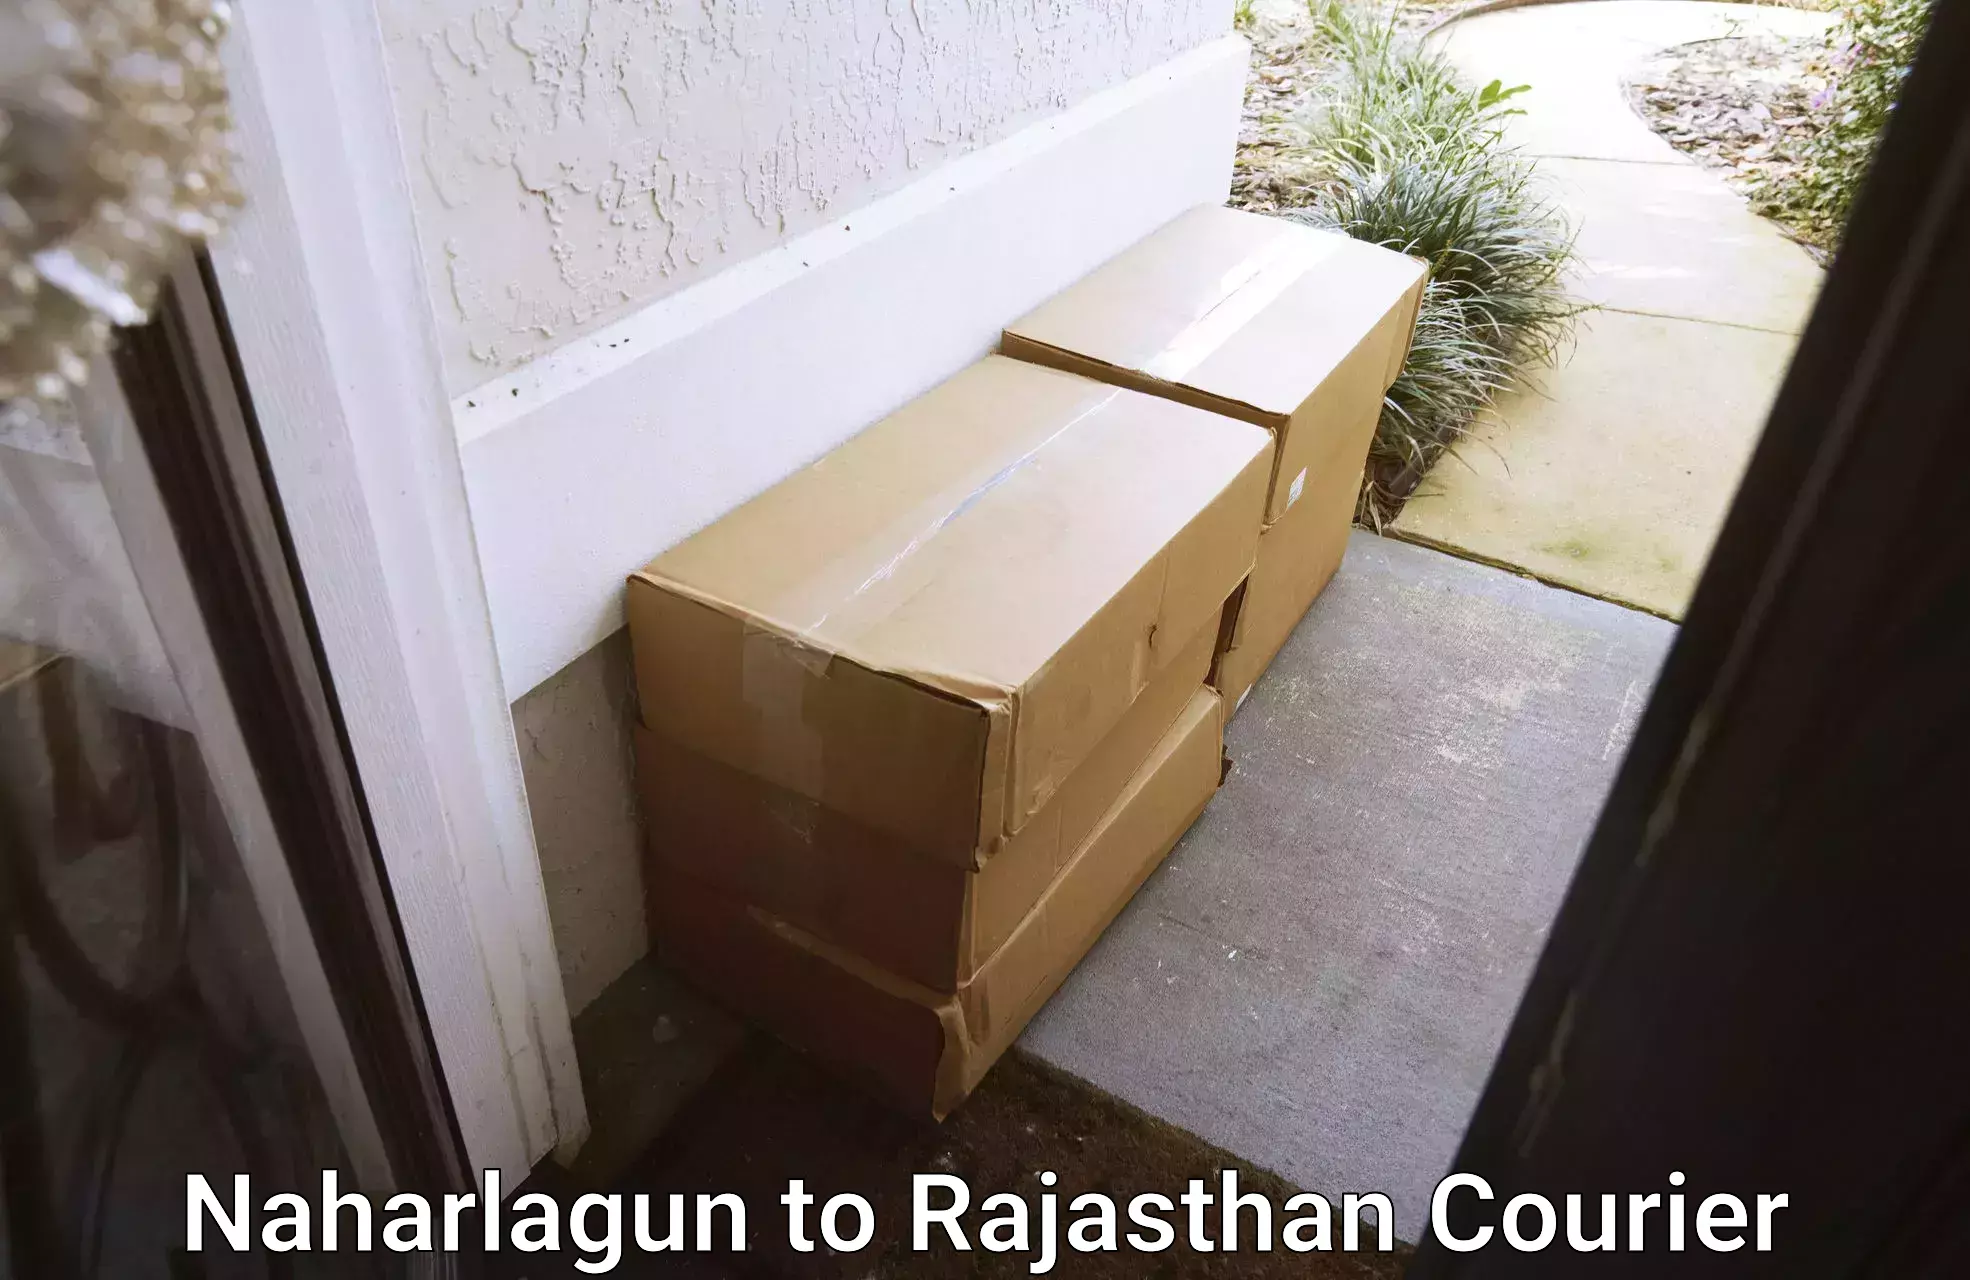 Full-service courier options in Naharlagun to Rajasthan